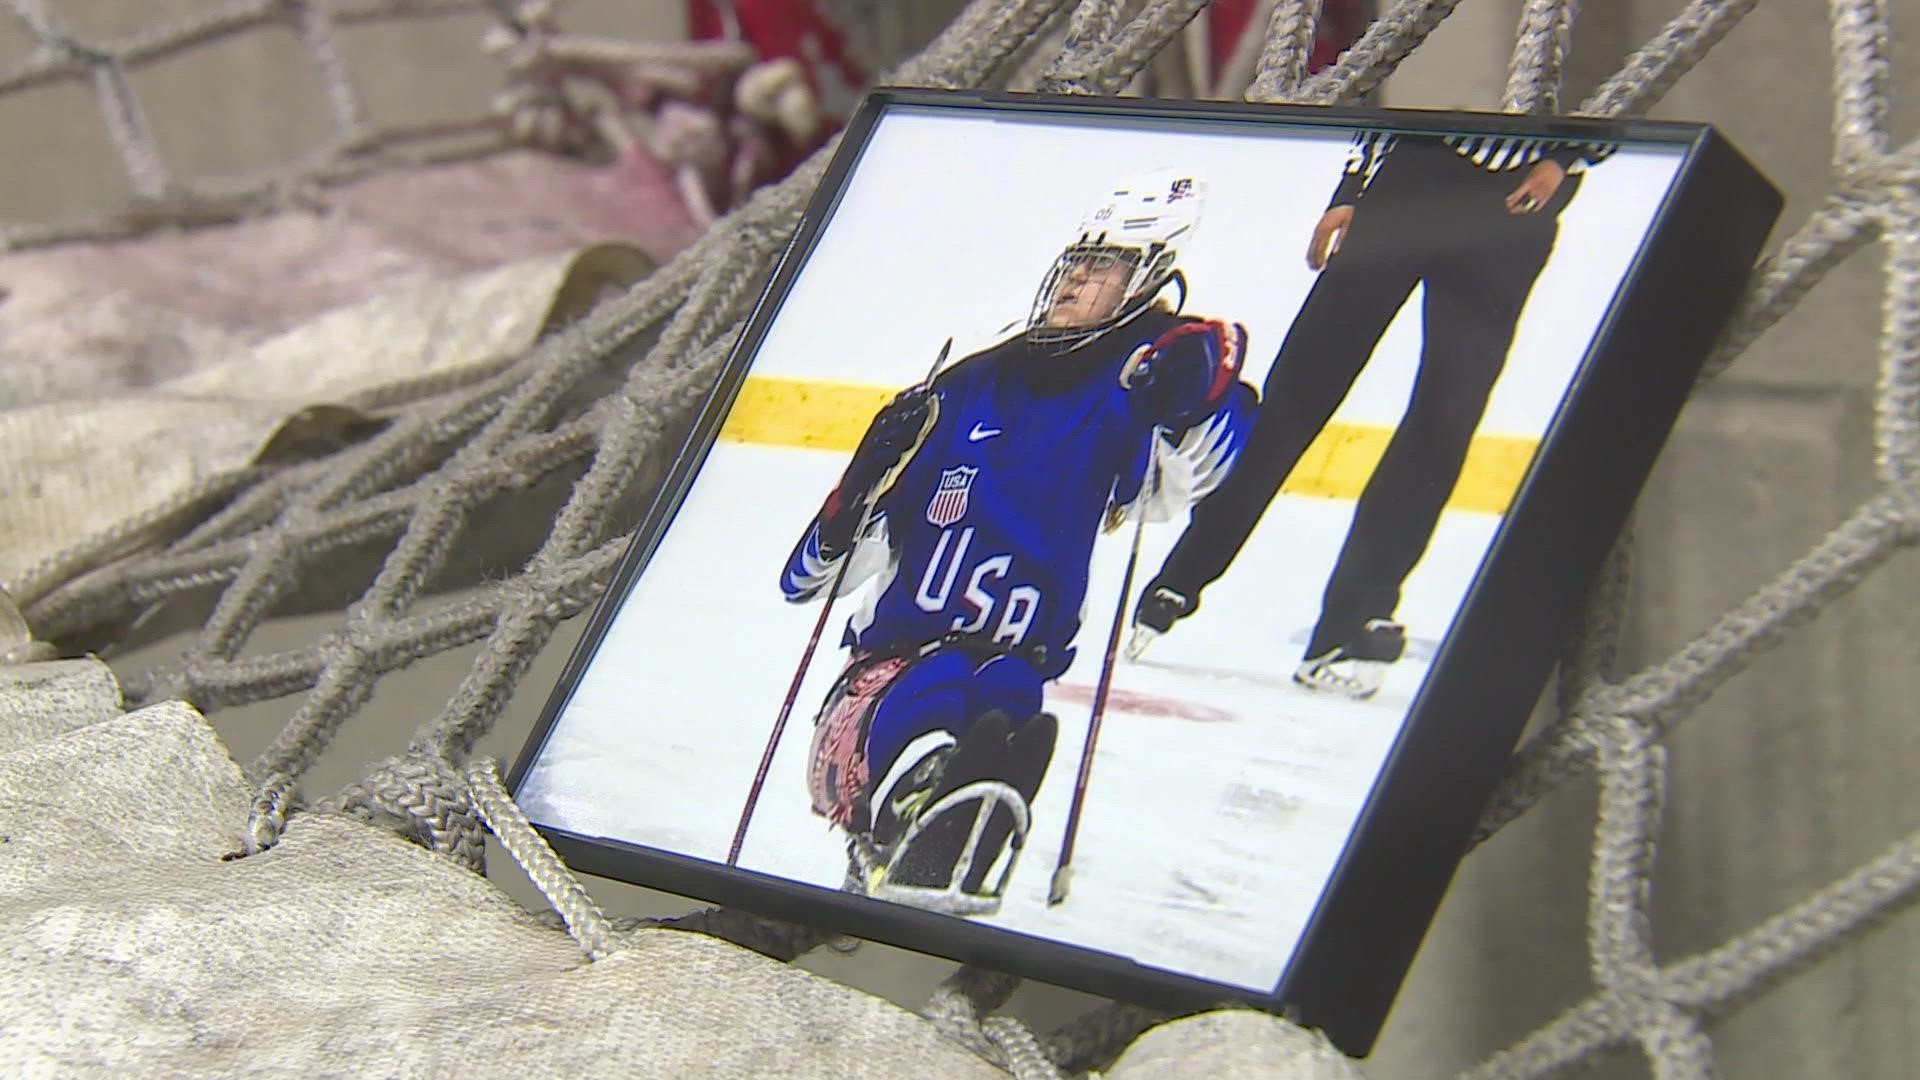 Photojournalist Amy Hunter introduces us to the world of sled hockey, and a Colorado woman making a name for herself in the sport.